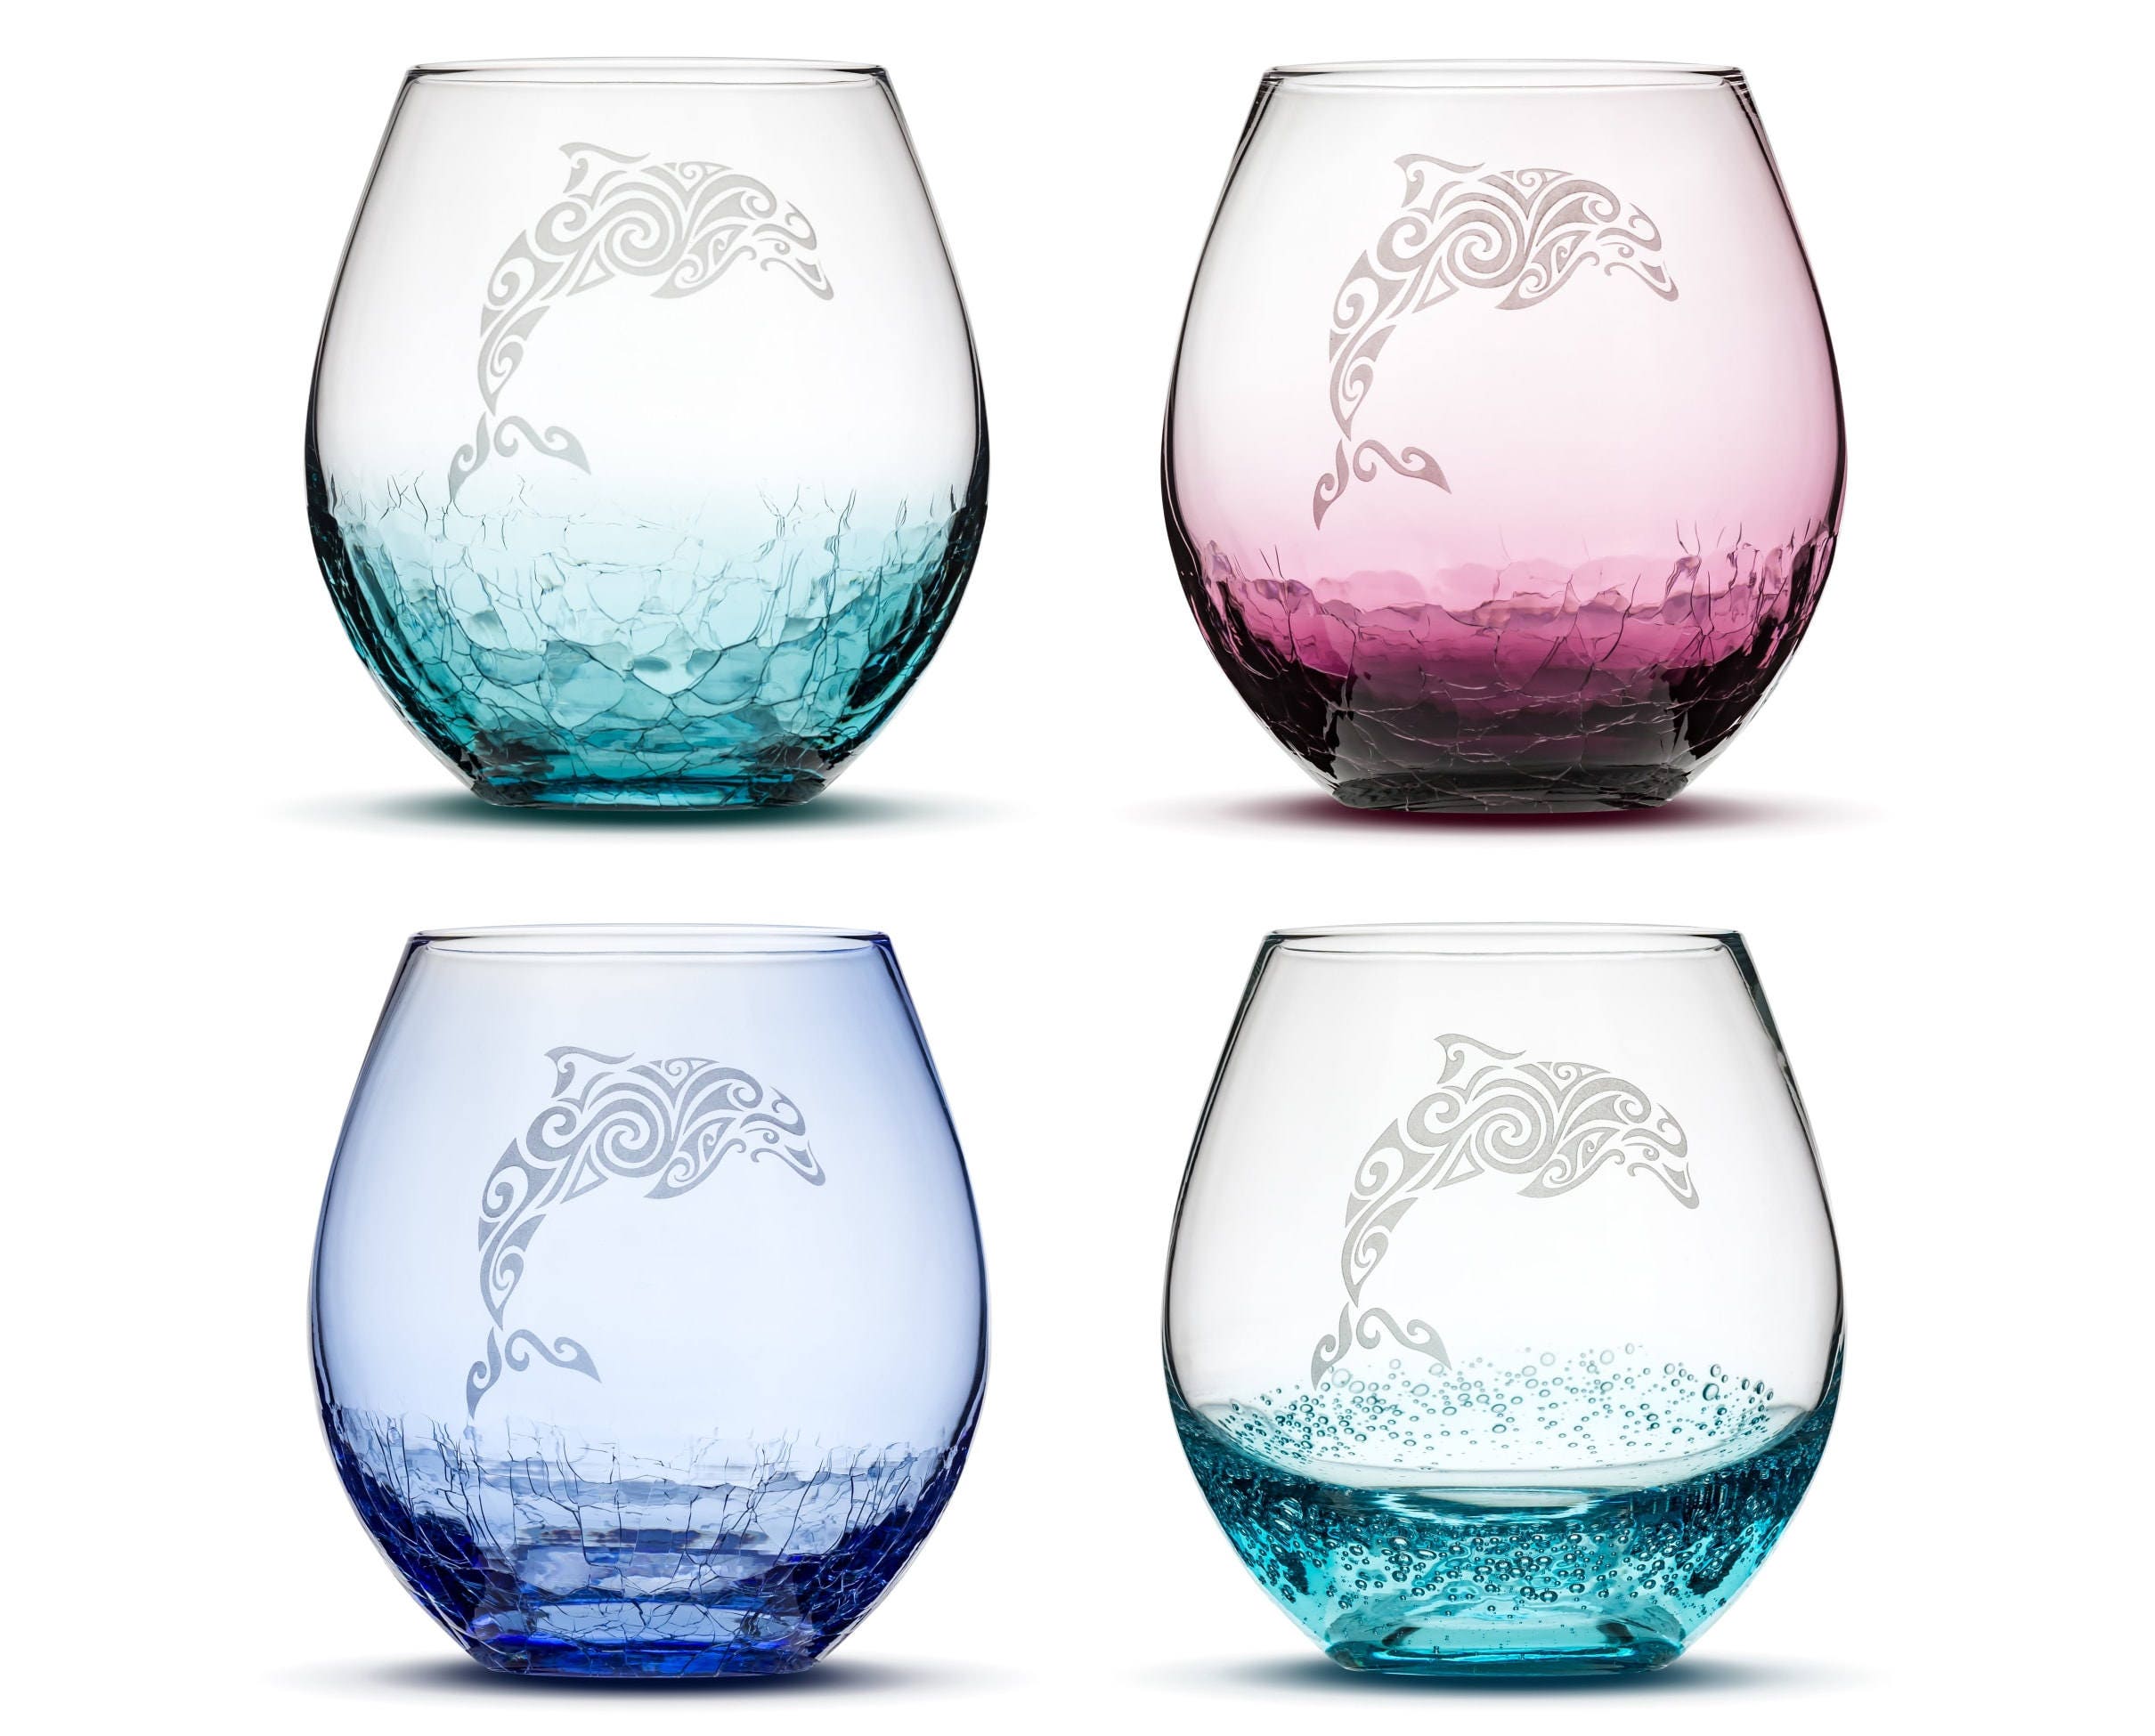 Dolphin Etched Wine Glass, Handblown Crackle, Tribal, Individual, Sand Carved by Integrity Bottles